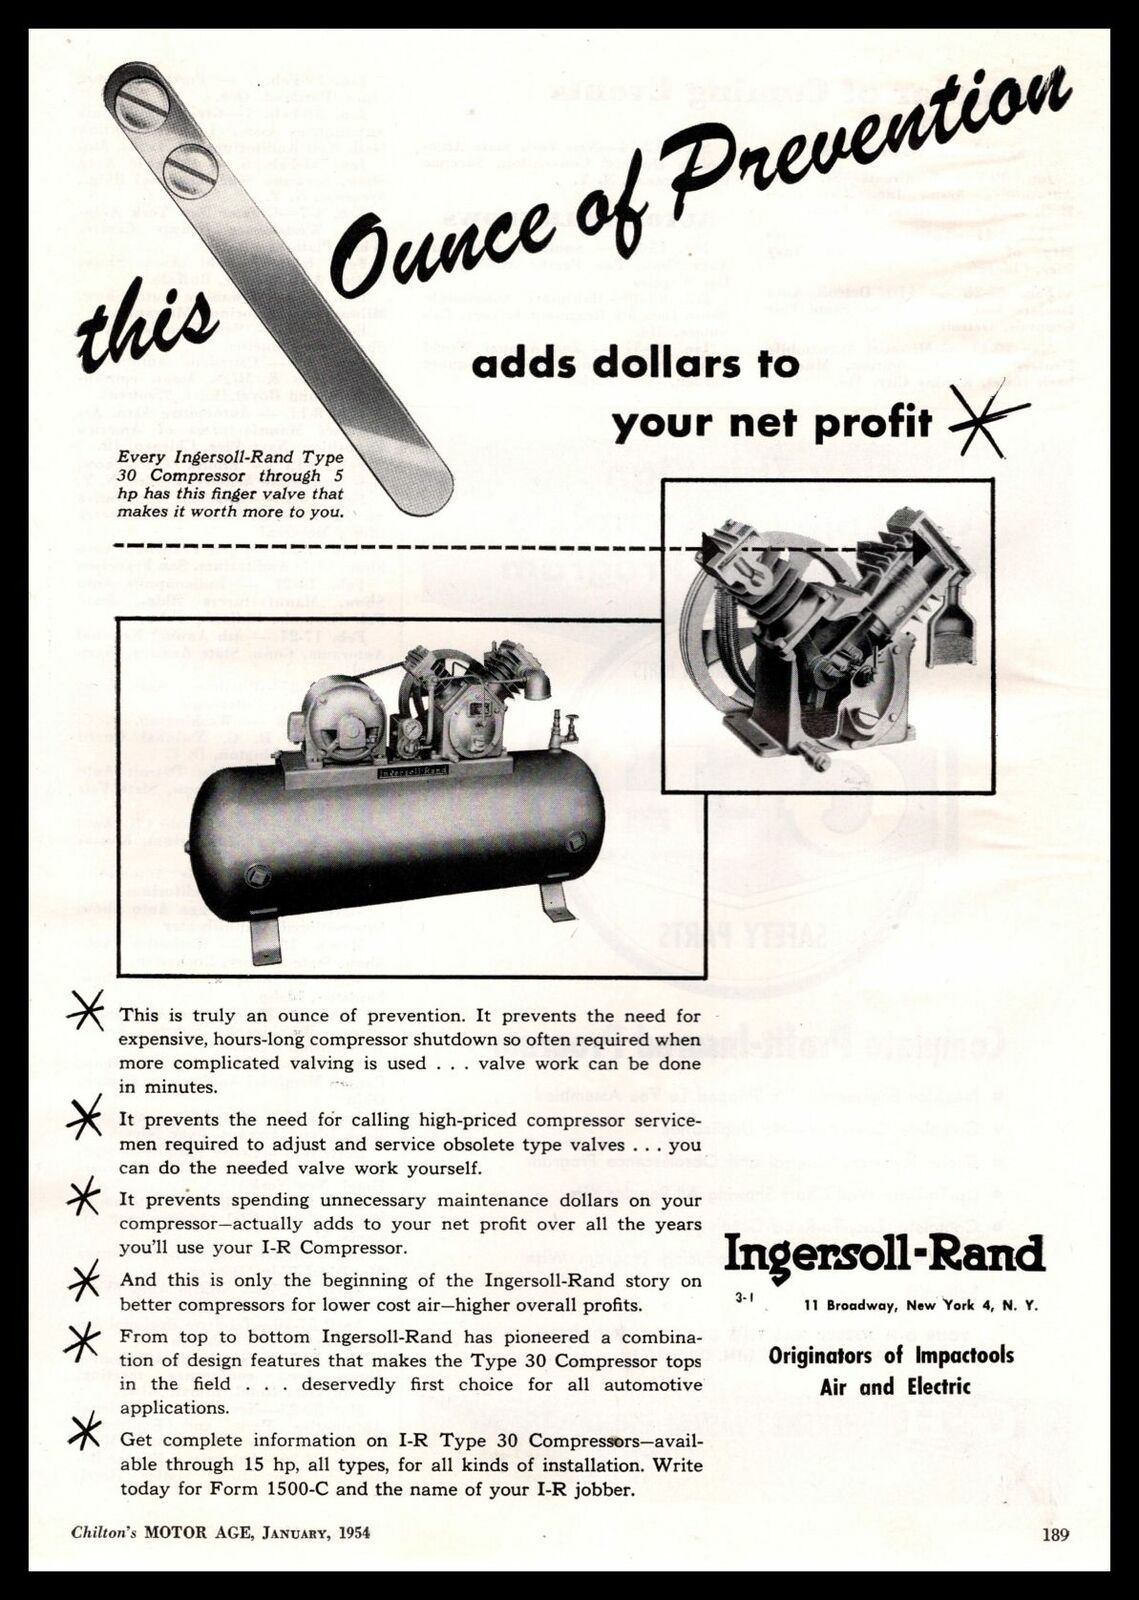 1954 Ingersoll Rand New York Type 30 Electric Air Compressor Vintage Print Ad